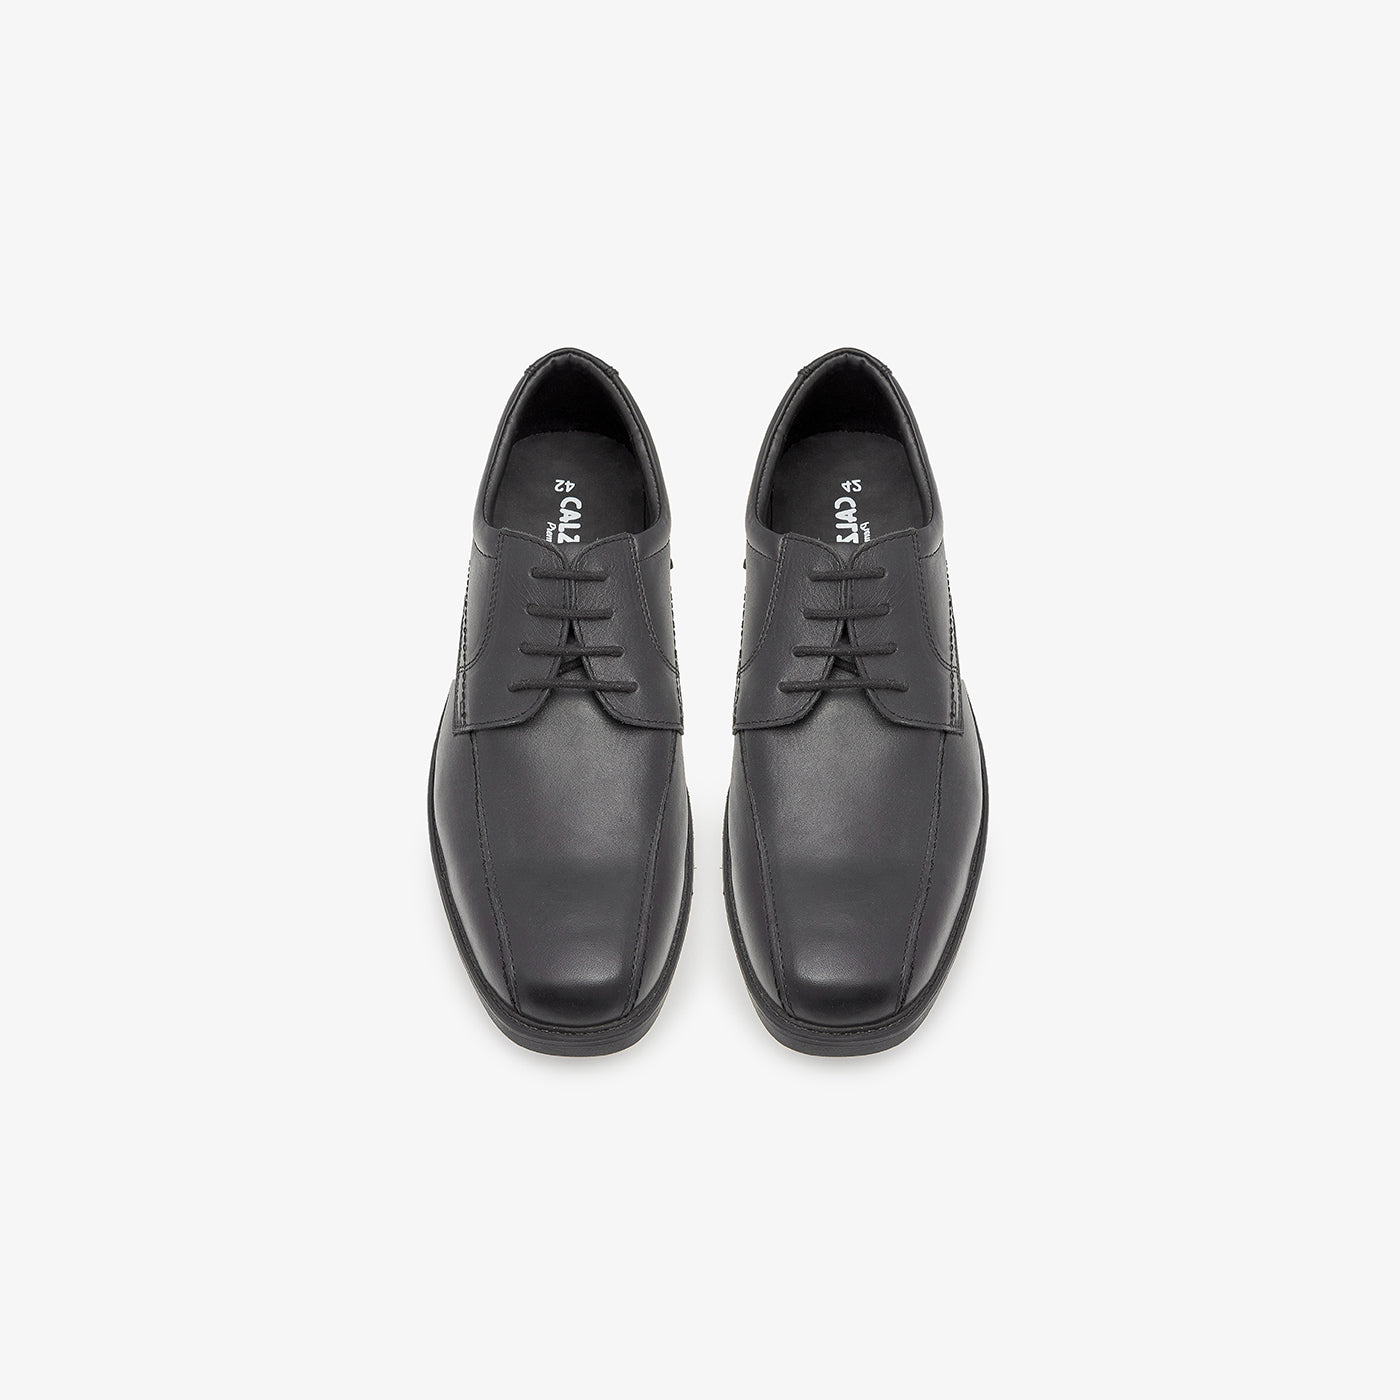 Classic Mens Formal Shoes